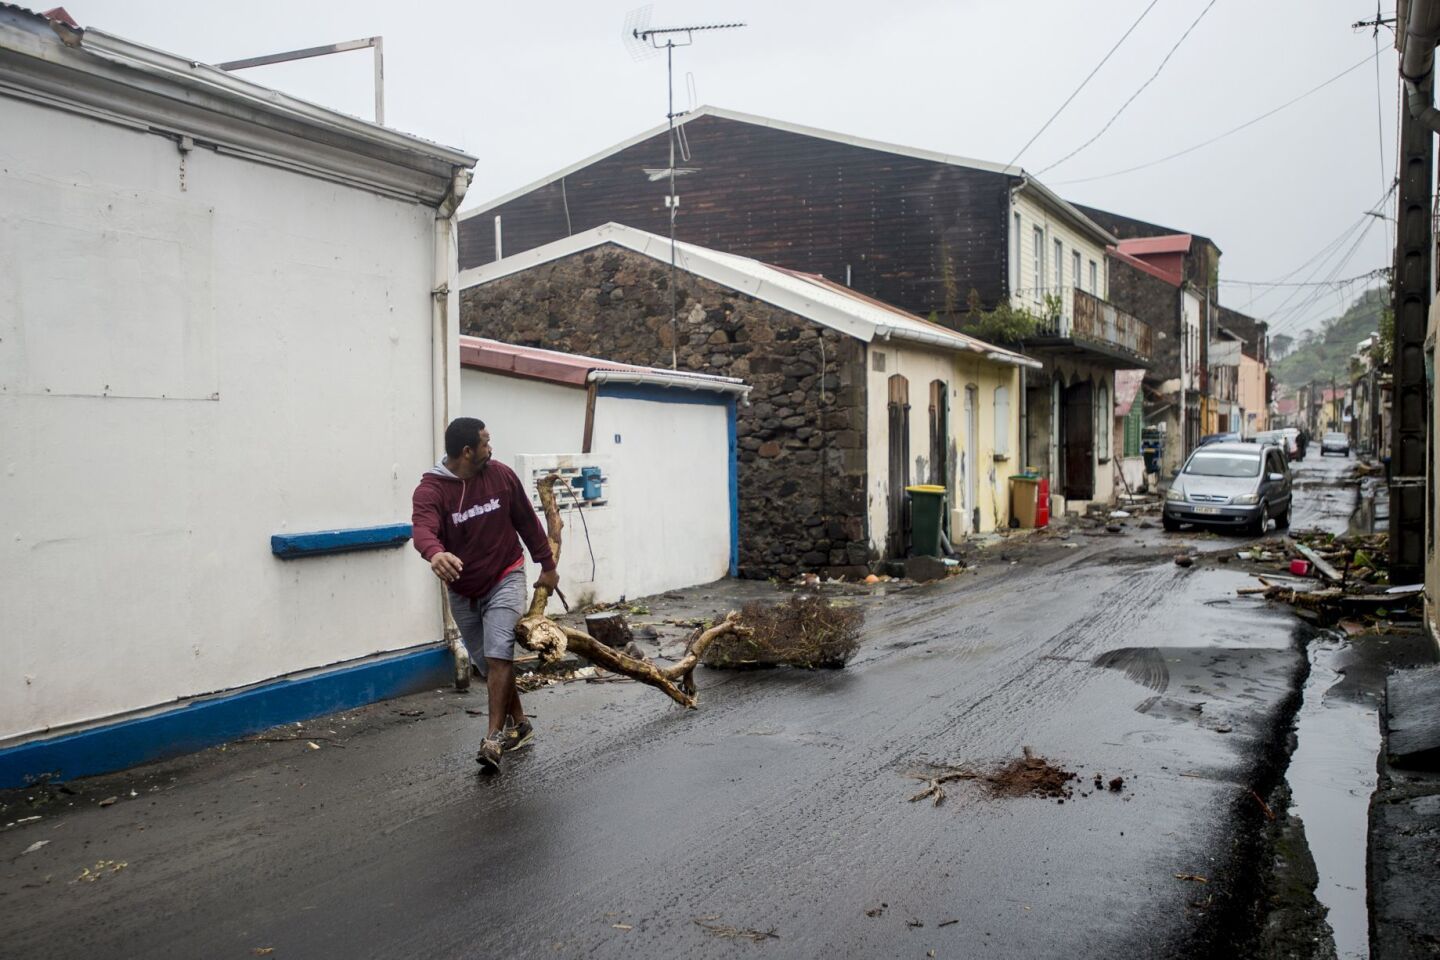 A man clears debris from a street in Saint-Pierre, on the French Caribbean island of Martinique, after it was hit by Hurricane Maria.